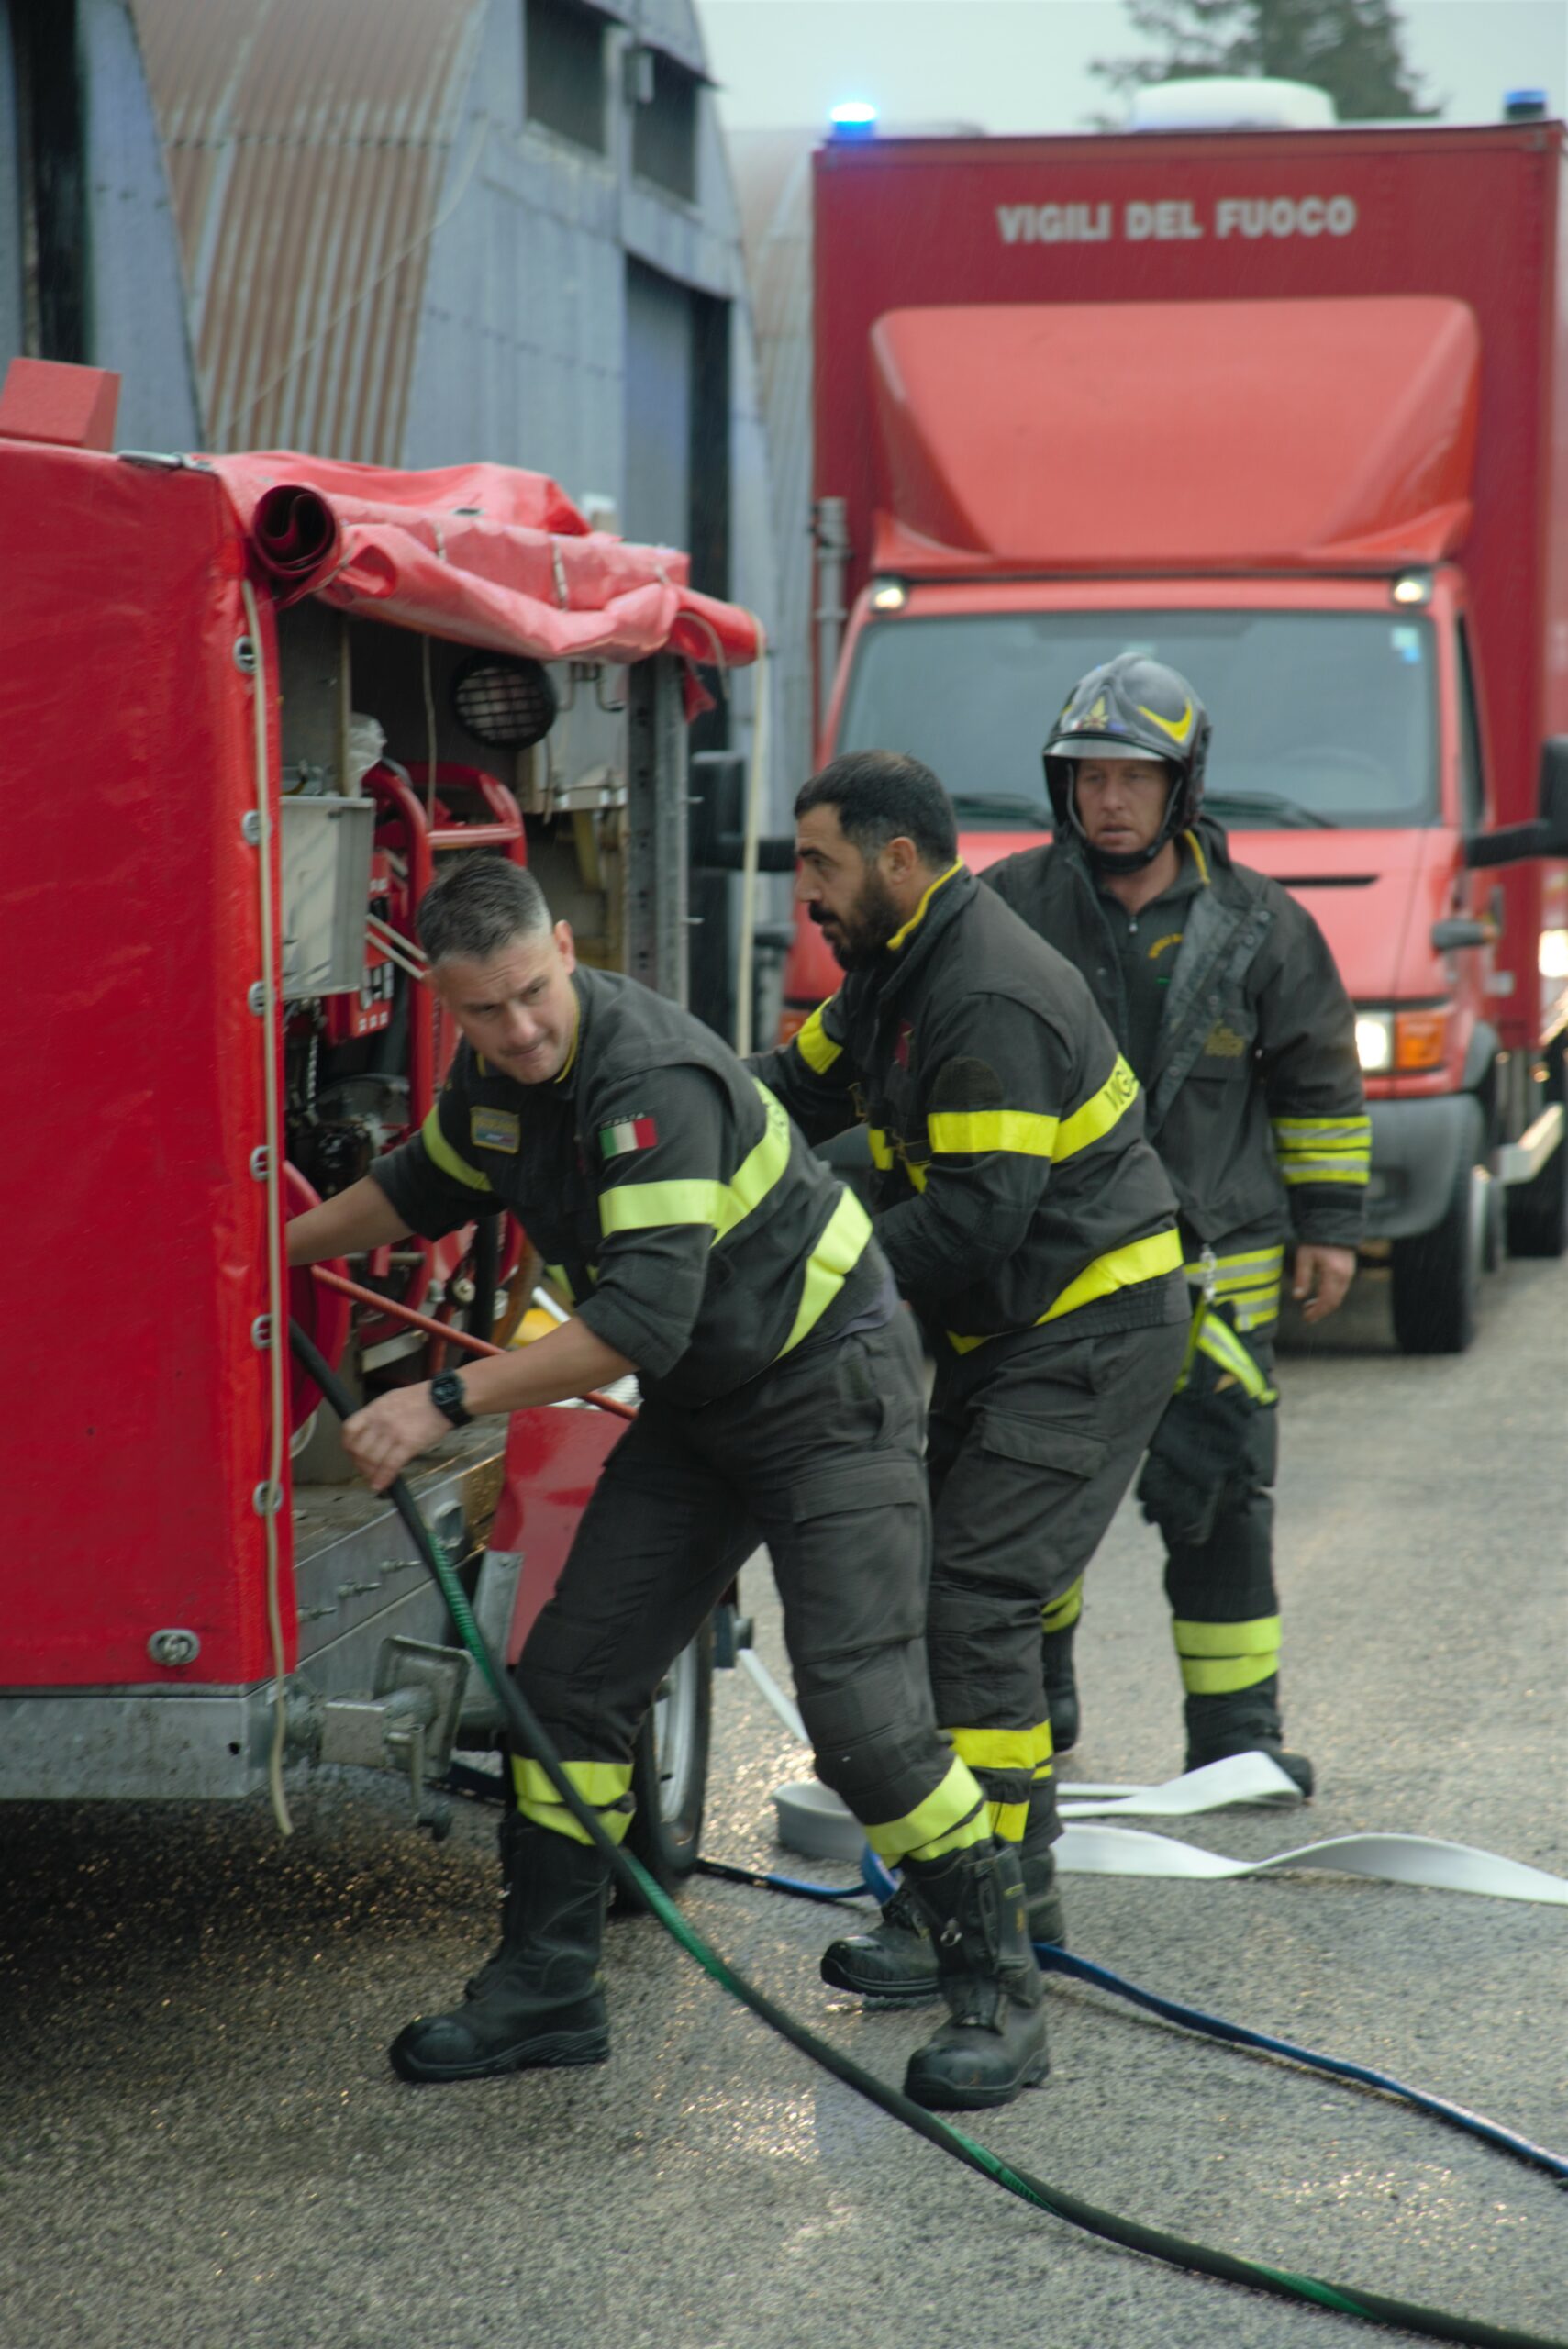 Three firefighters (men) in a special uniform standing next to equipment and are preparing nozzles.